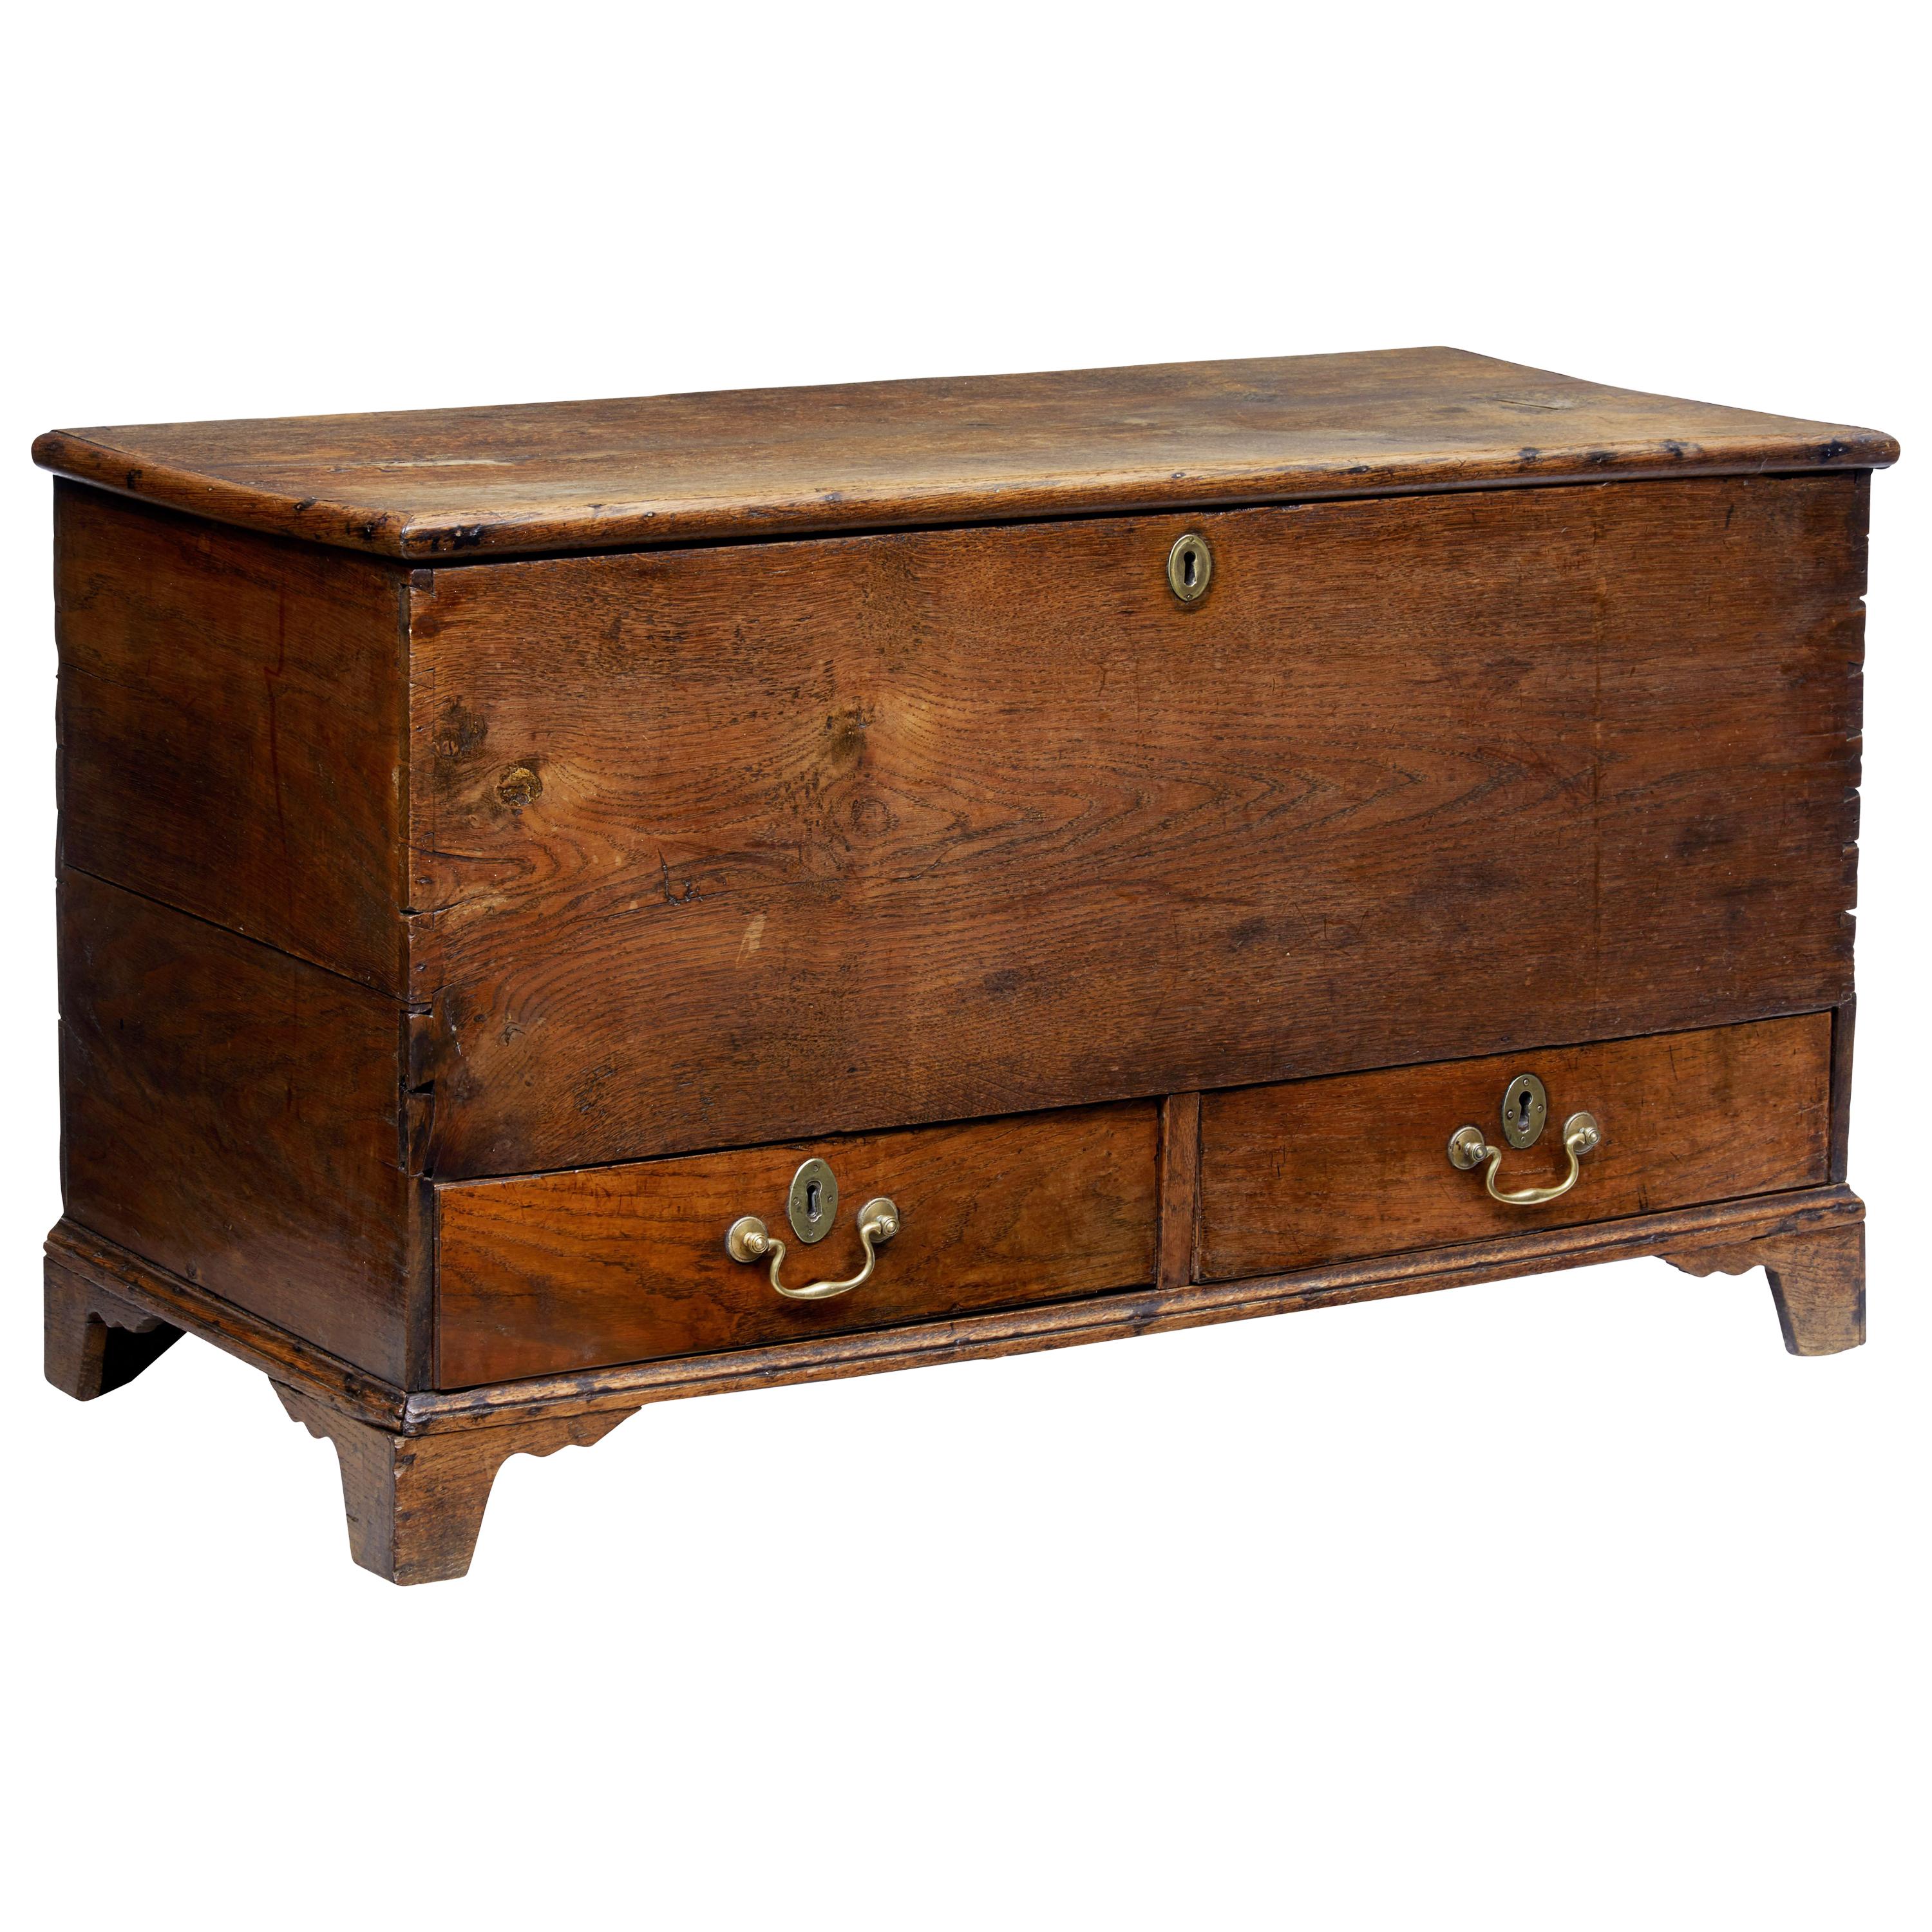 Late 18th Century Oak Mule Chest of Small Proportions